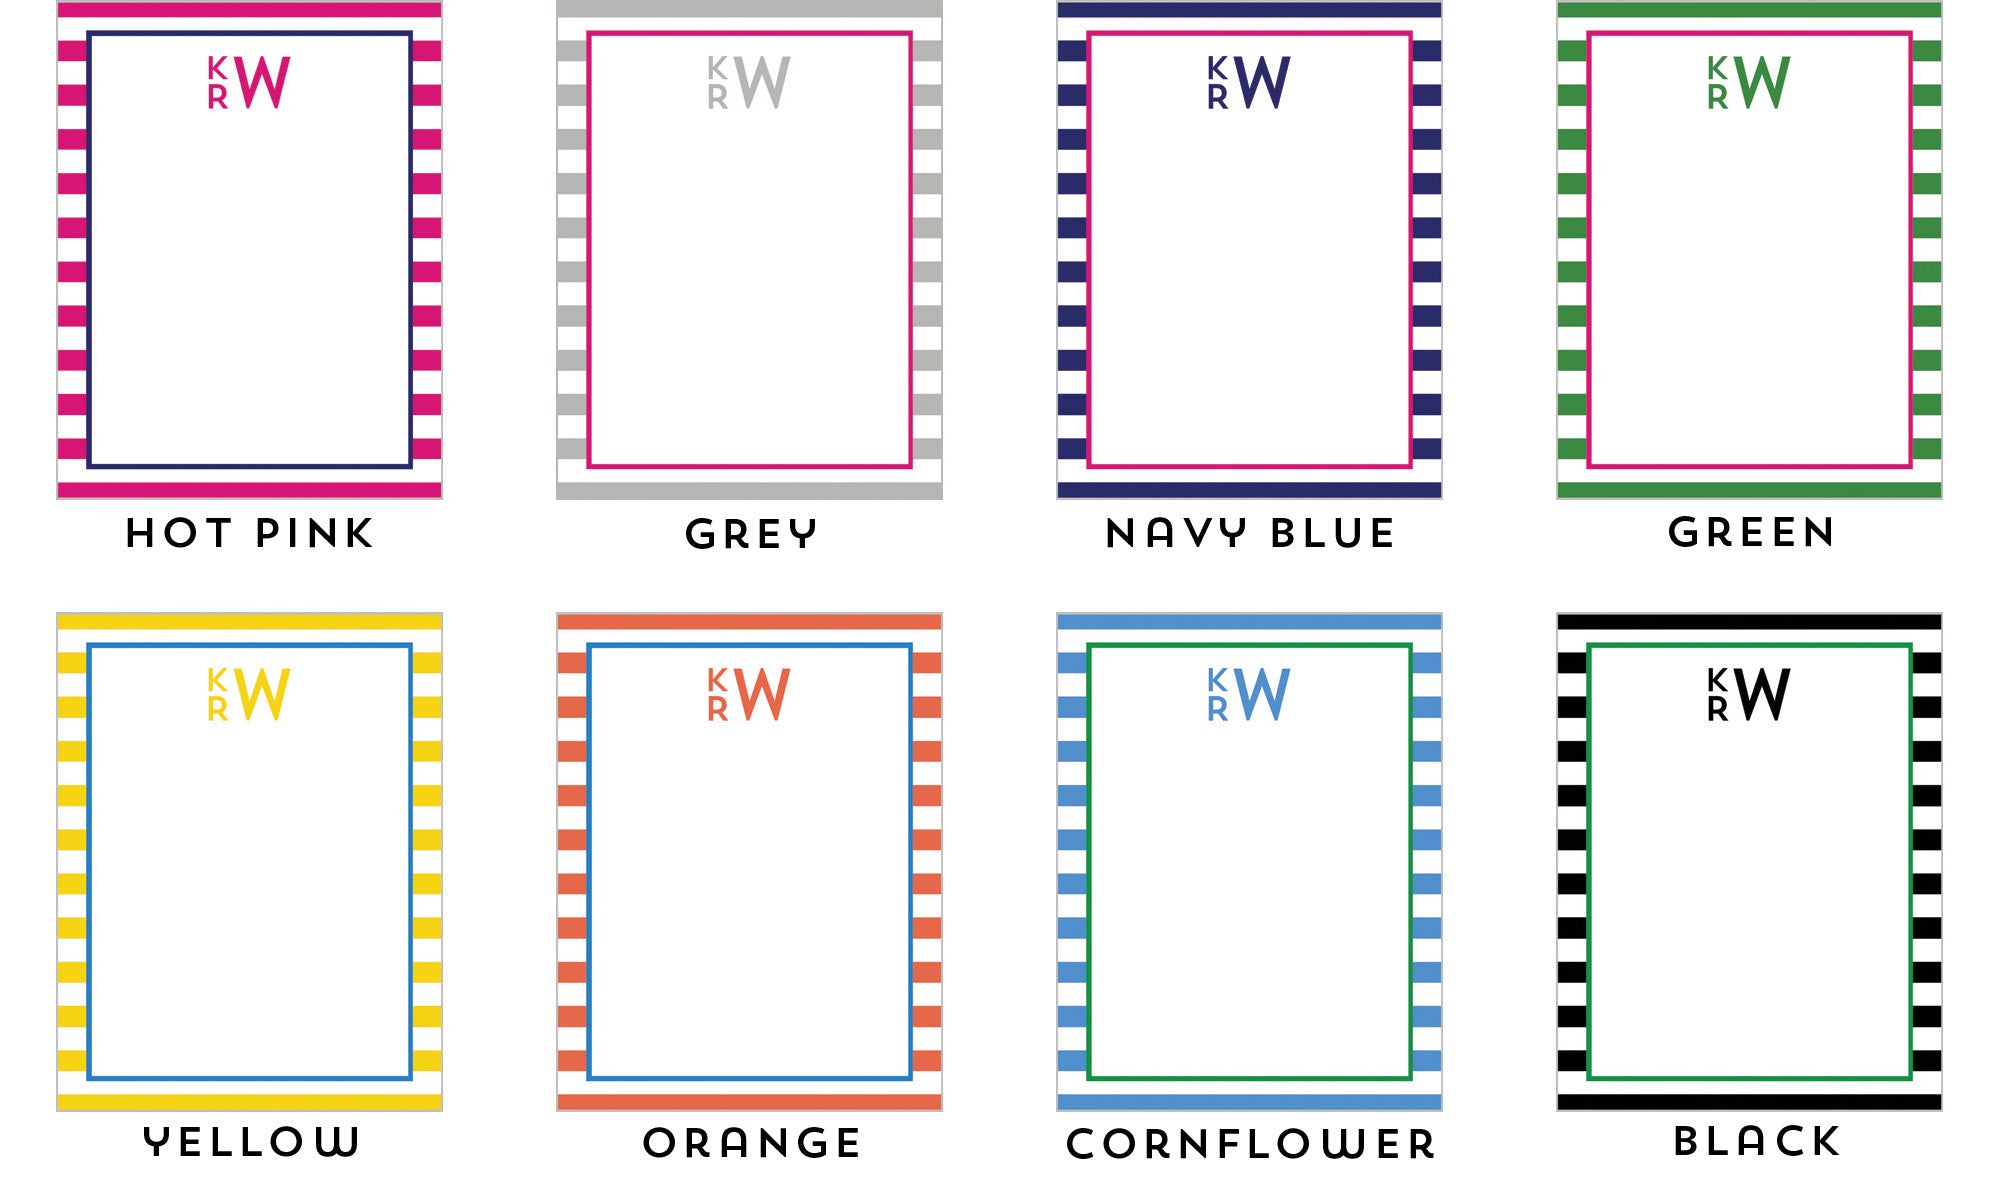 Rugby Stripe Monogram Personalized Notepad - Multiple Colors